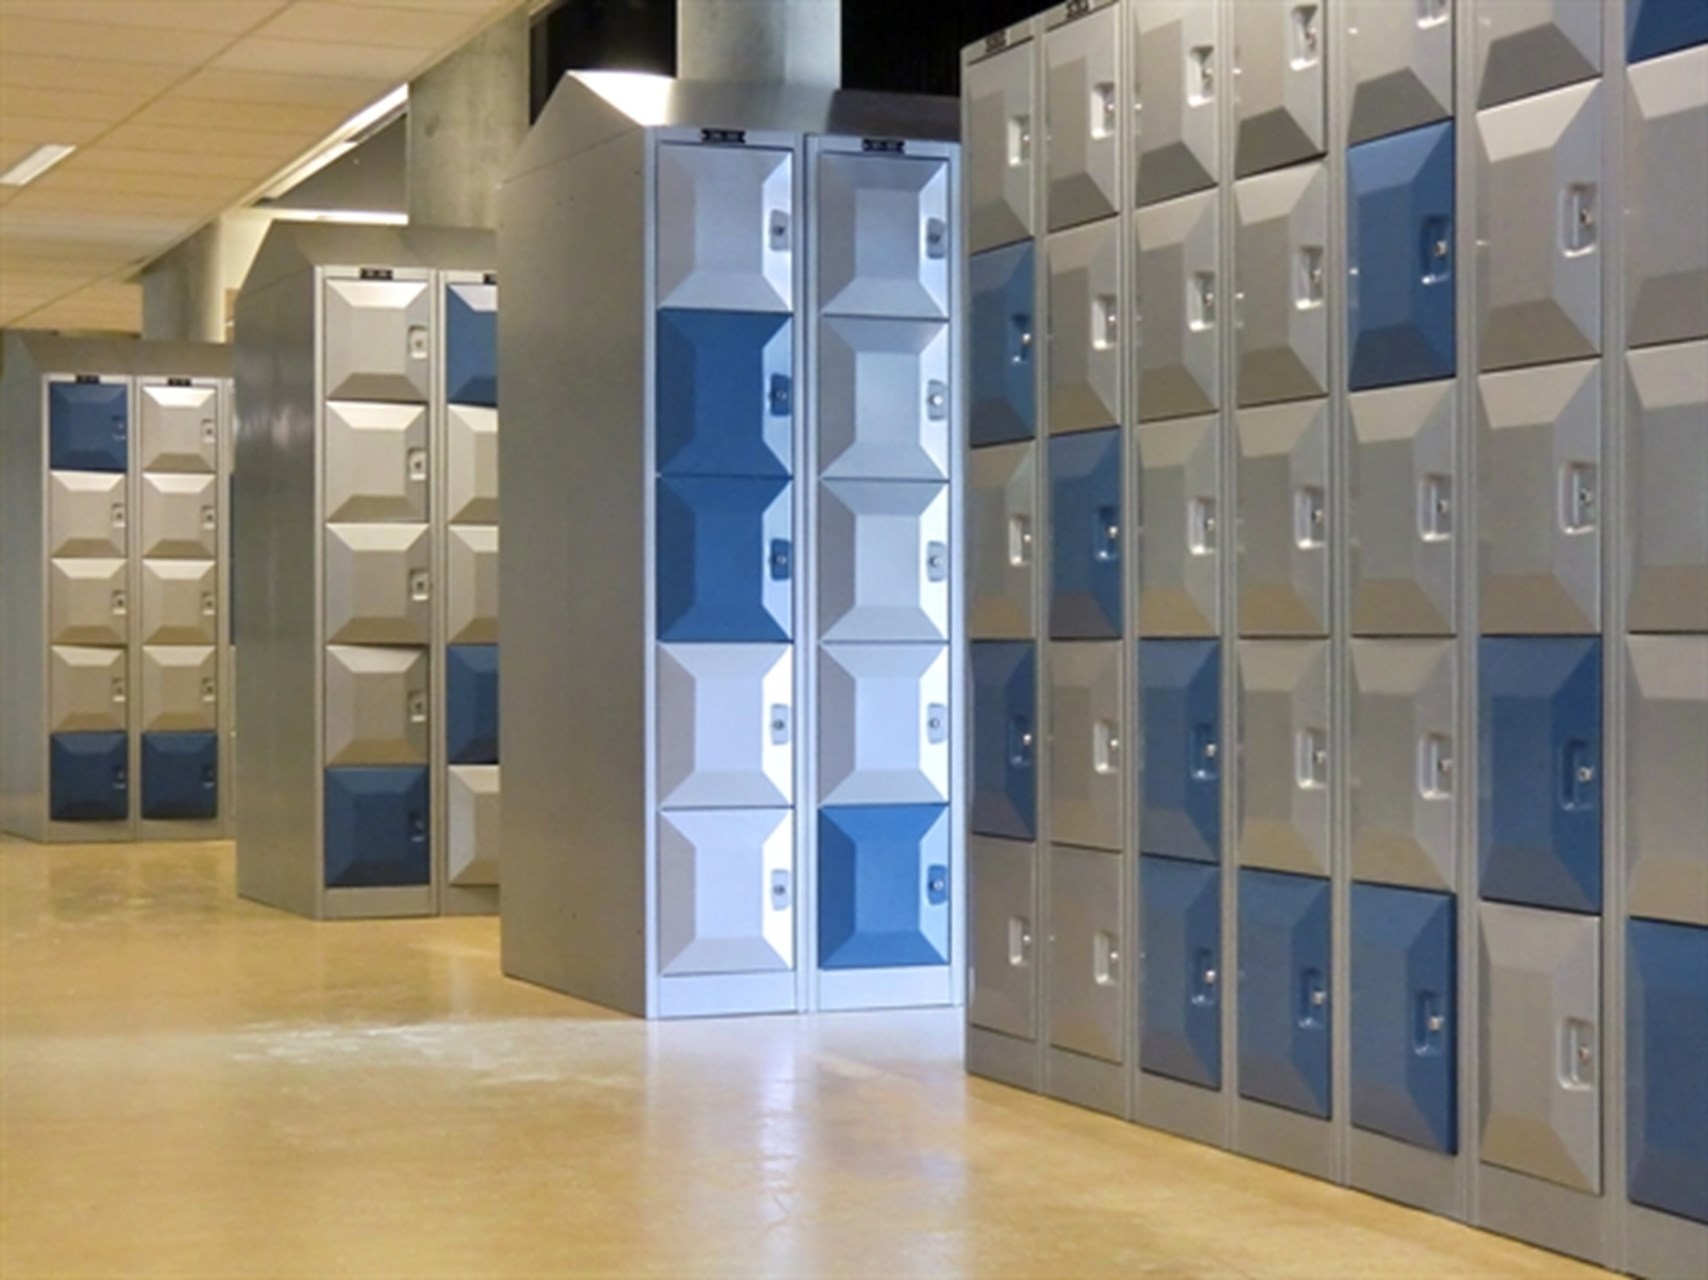 Example of the P model compartment locker